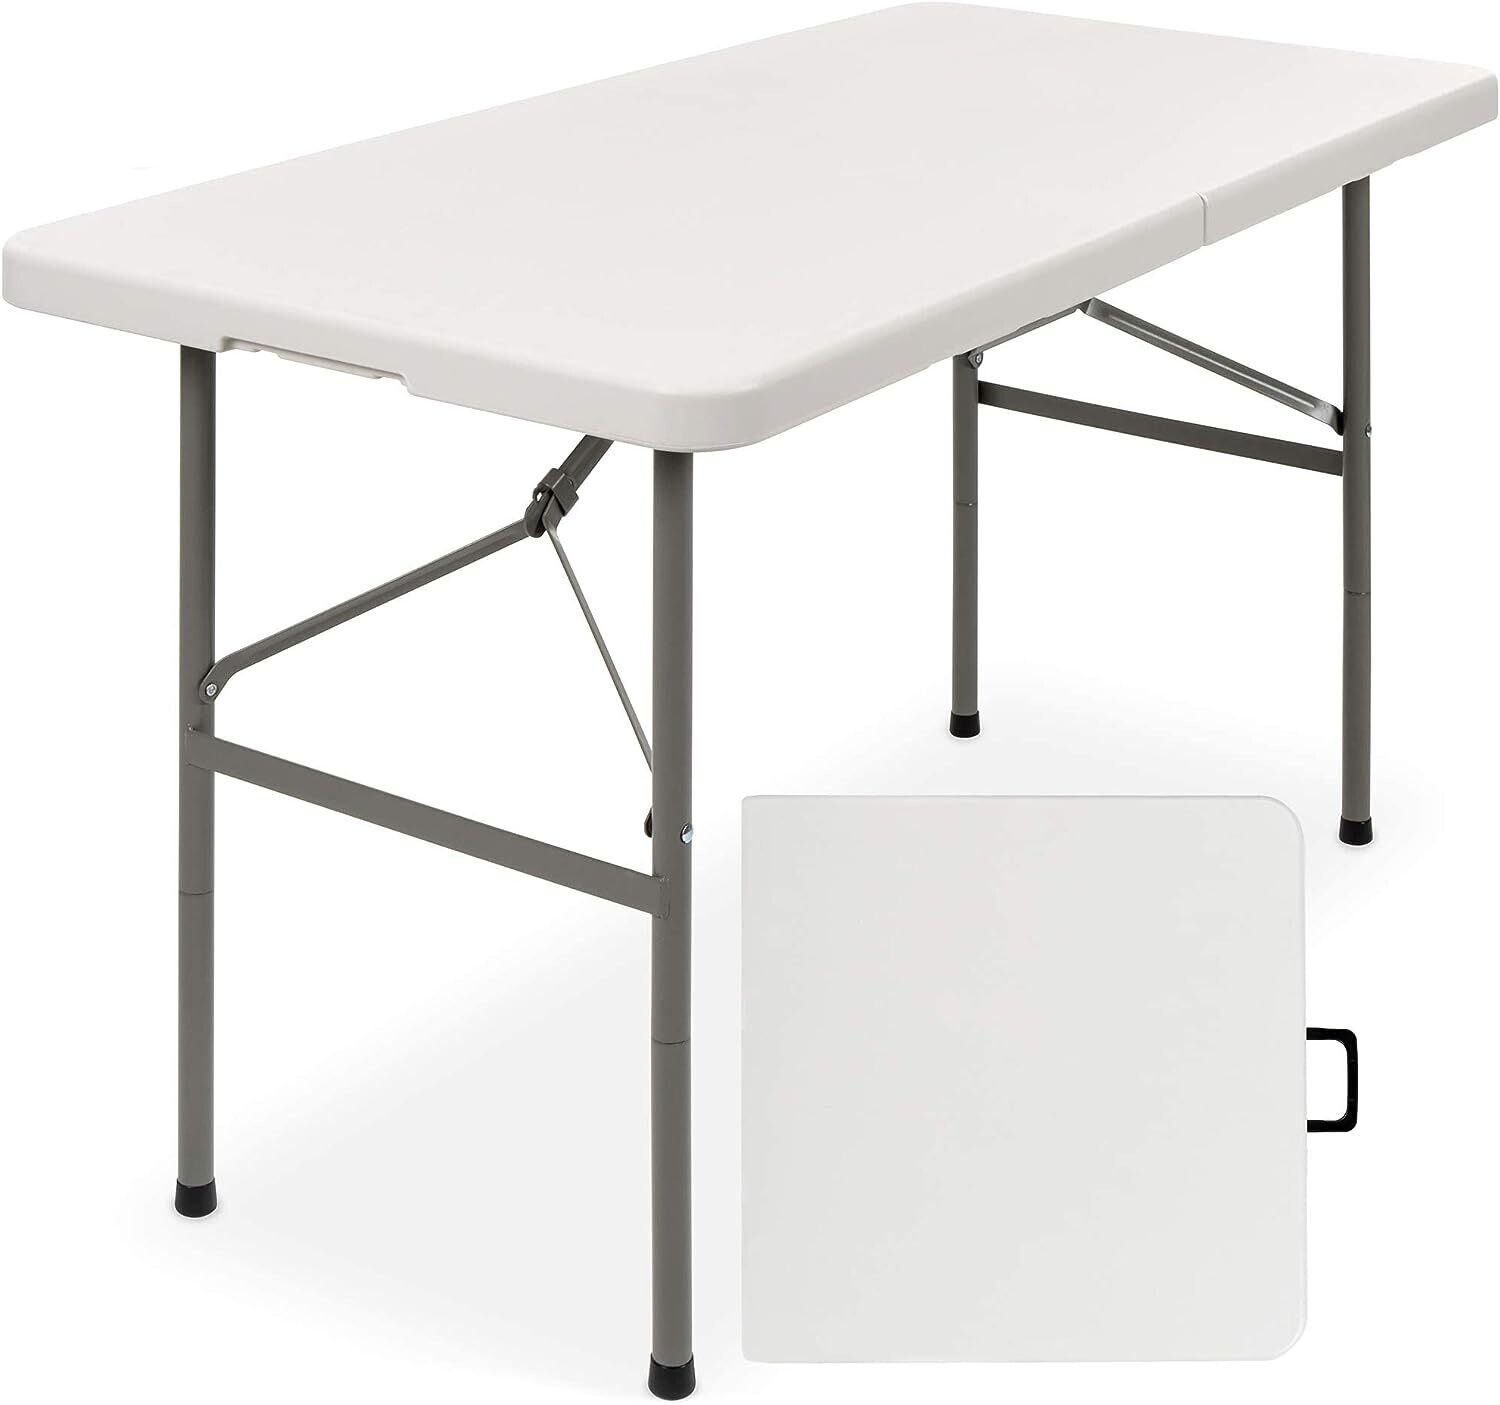 Strong Foldable Table in plastic Length 1.2m capacity 130kg Small